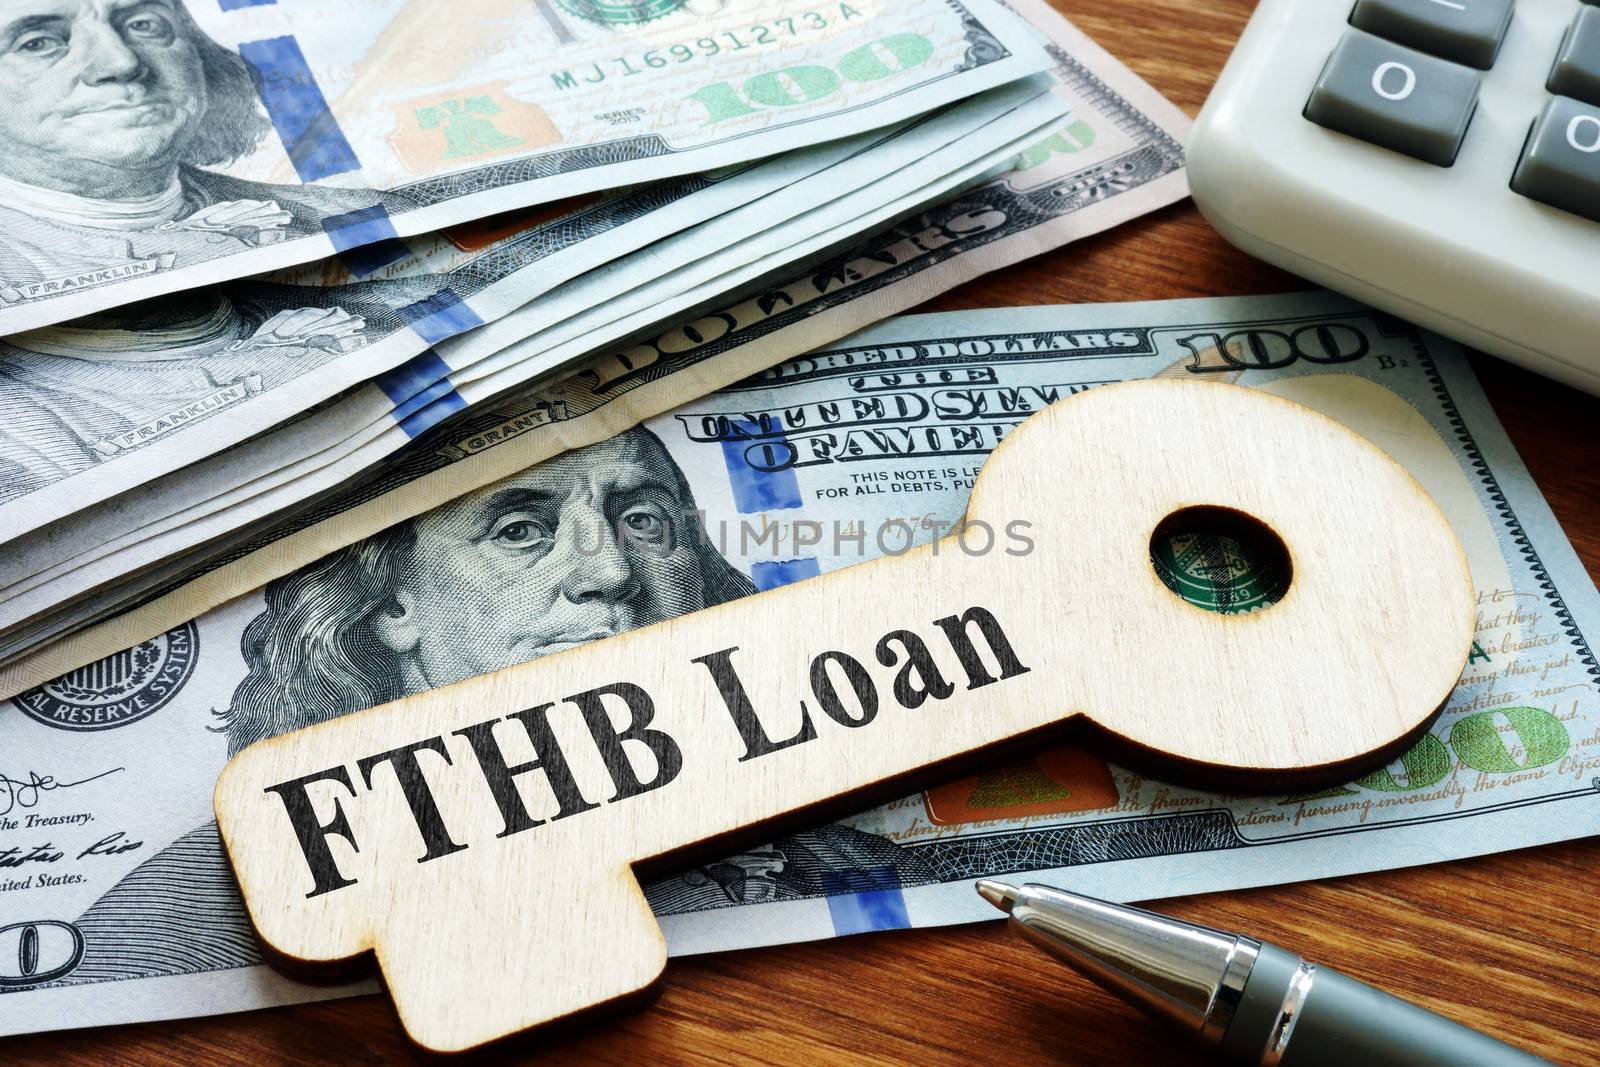 First-Time Homebuyer FTHB Loan printed on the wooden key.